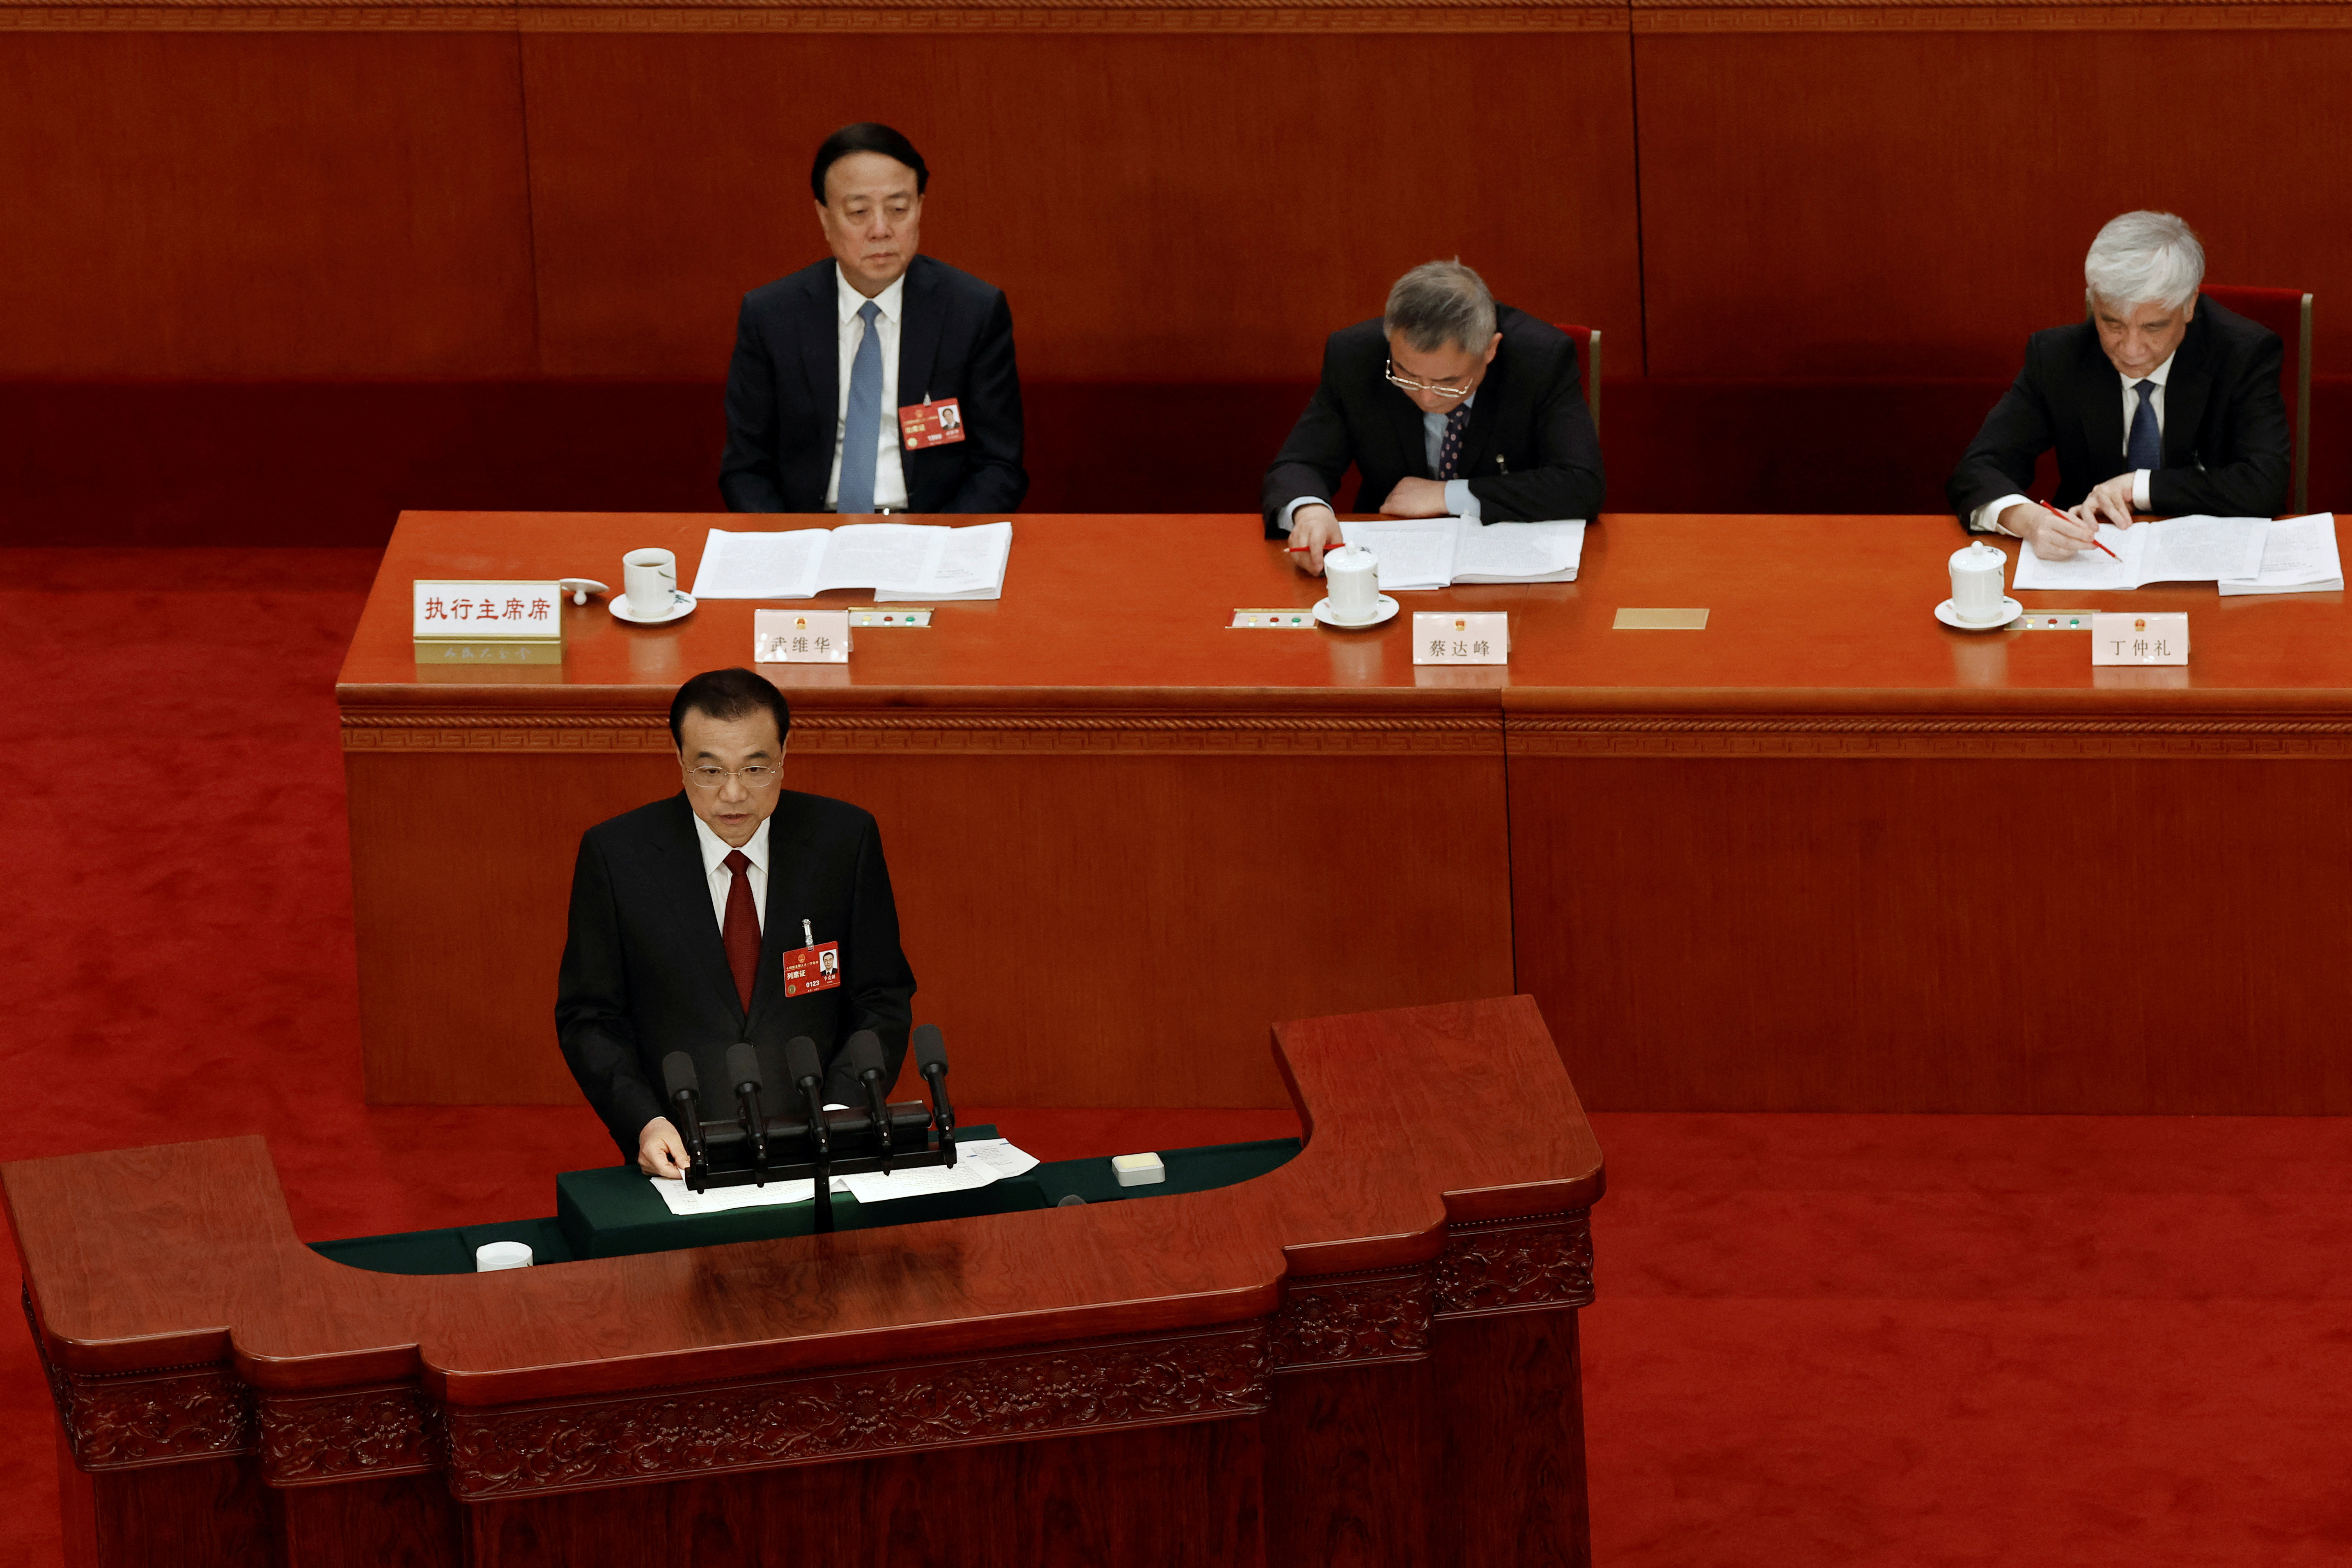 In his speech, Li asserted that the Chinese People's Liberation Army (PLA) must 